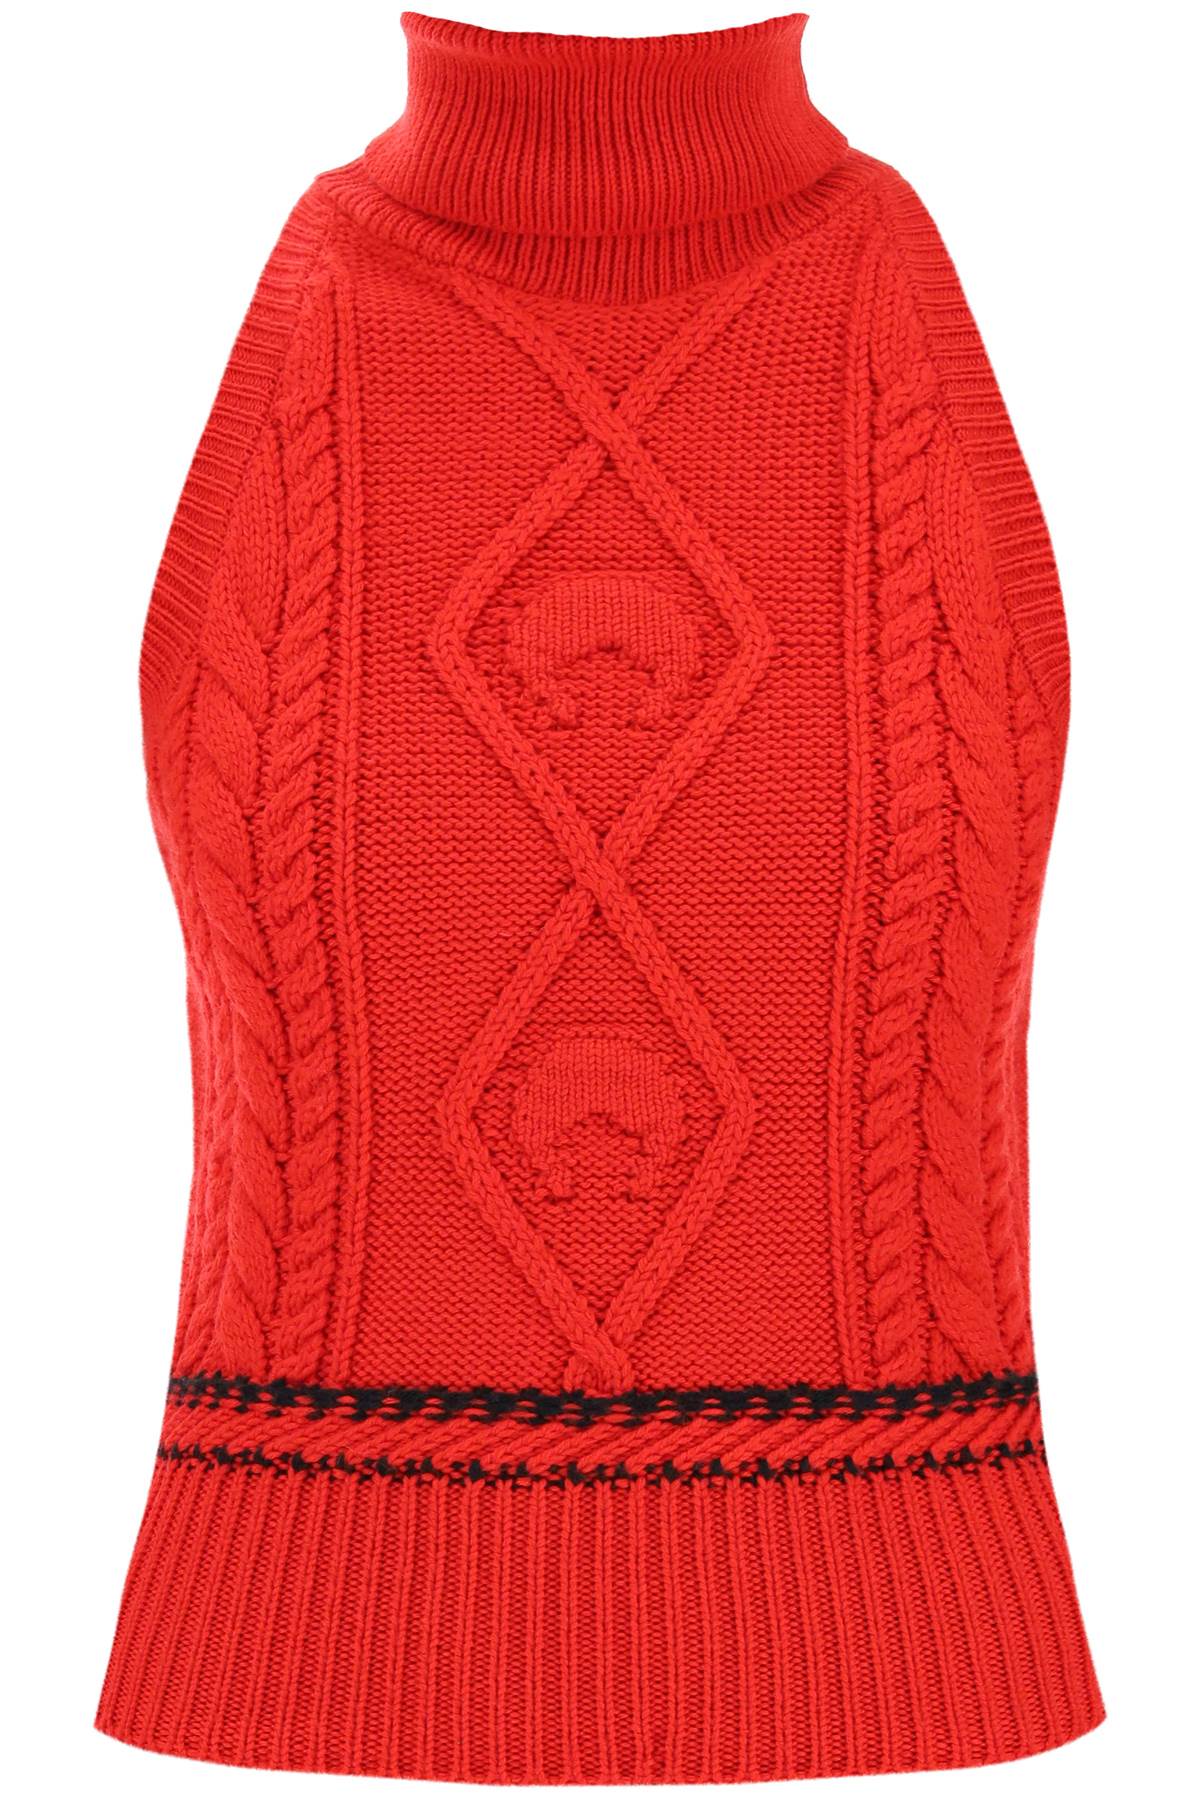 Marine Serre Cable-knit Top